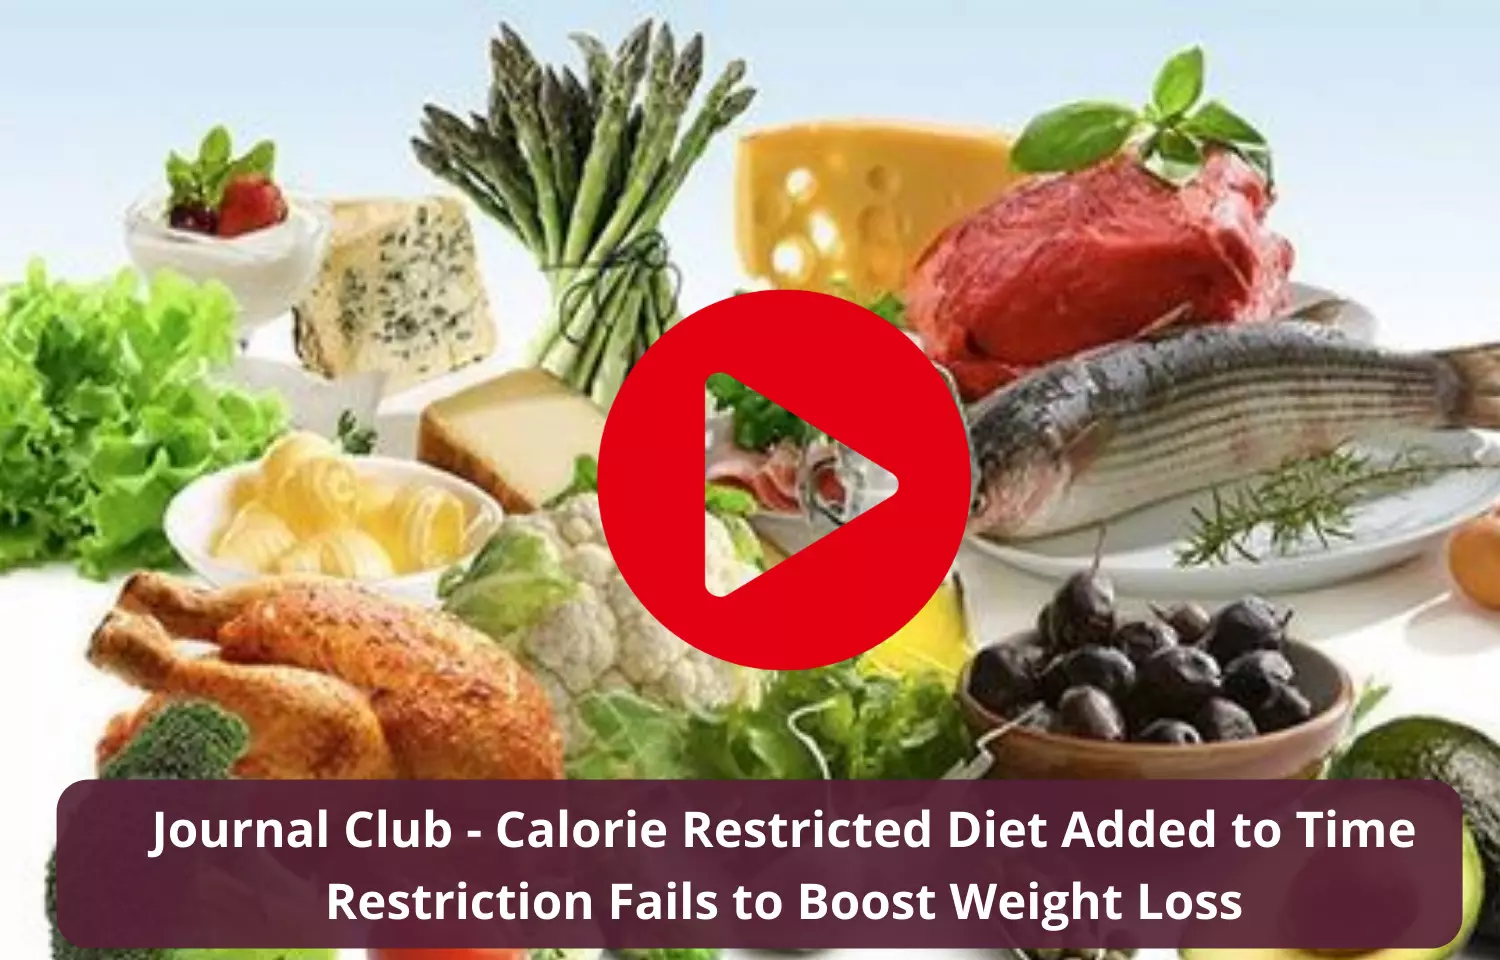 Journal Club - Calorie Restricted Diet with Added Time Restriction Fails to Boost Weight Loss